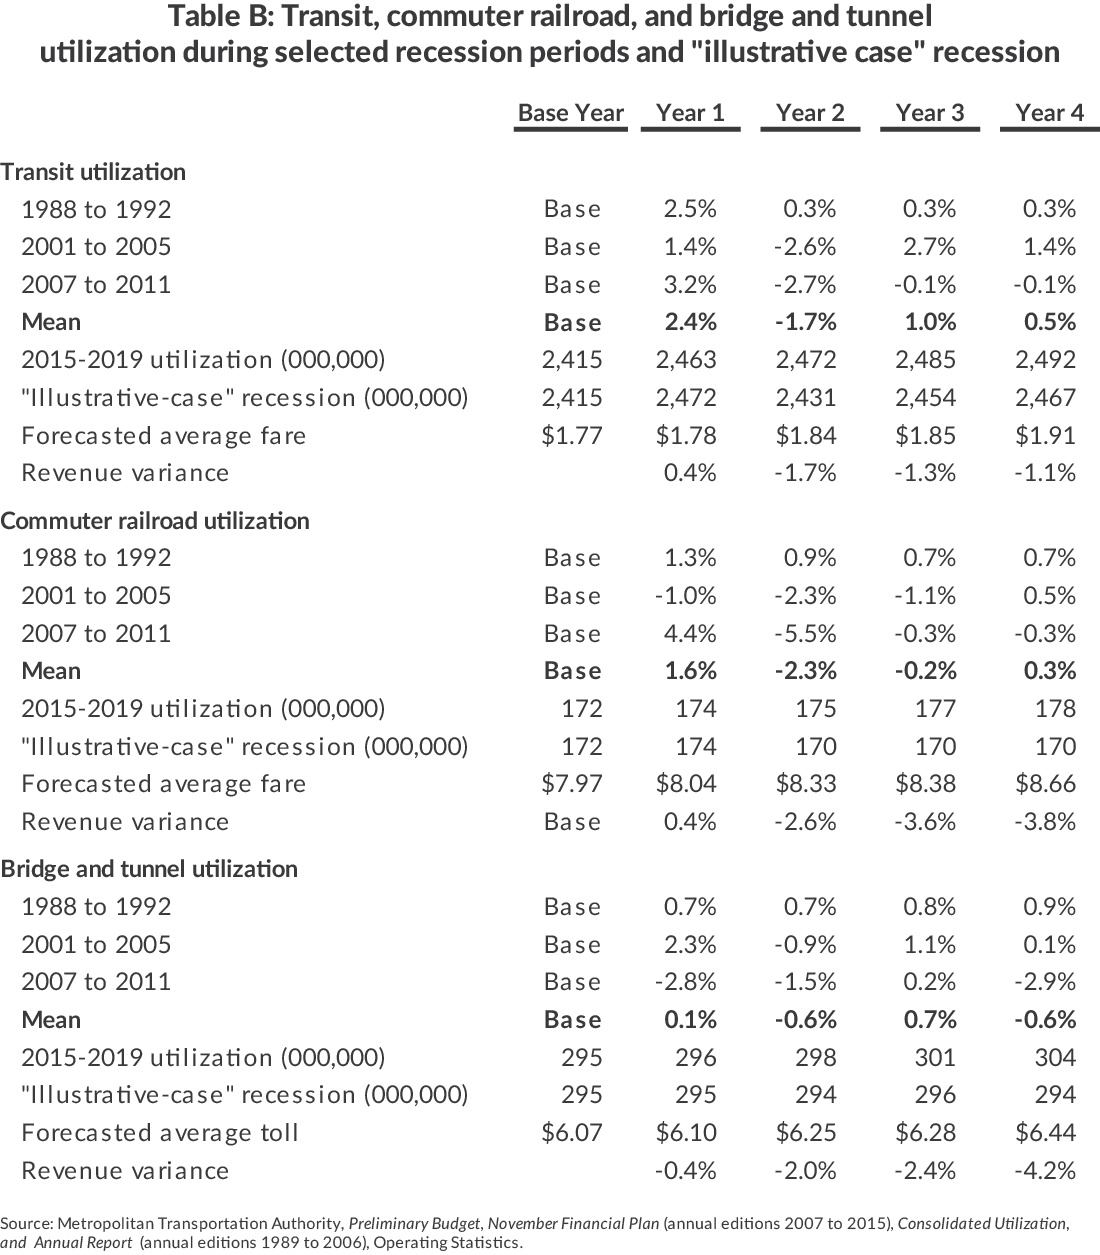 Table B: Transit, Commuter Railroad, and Bridge and TunnelUtilization During Selected Recession Periods and "Illustrative Case" Recession